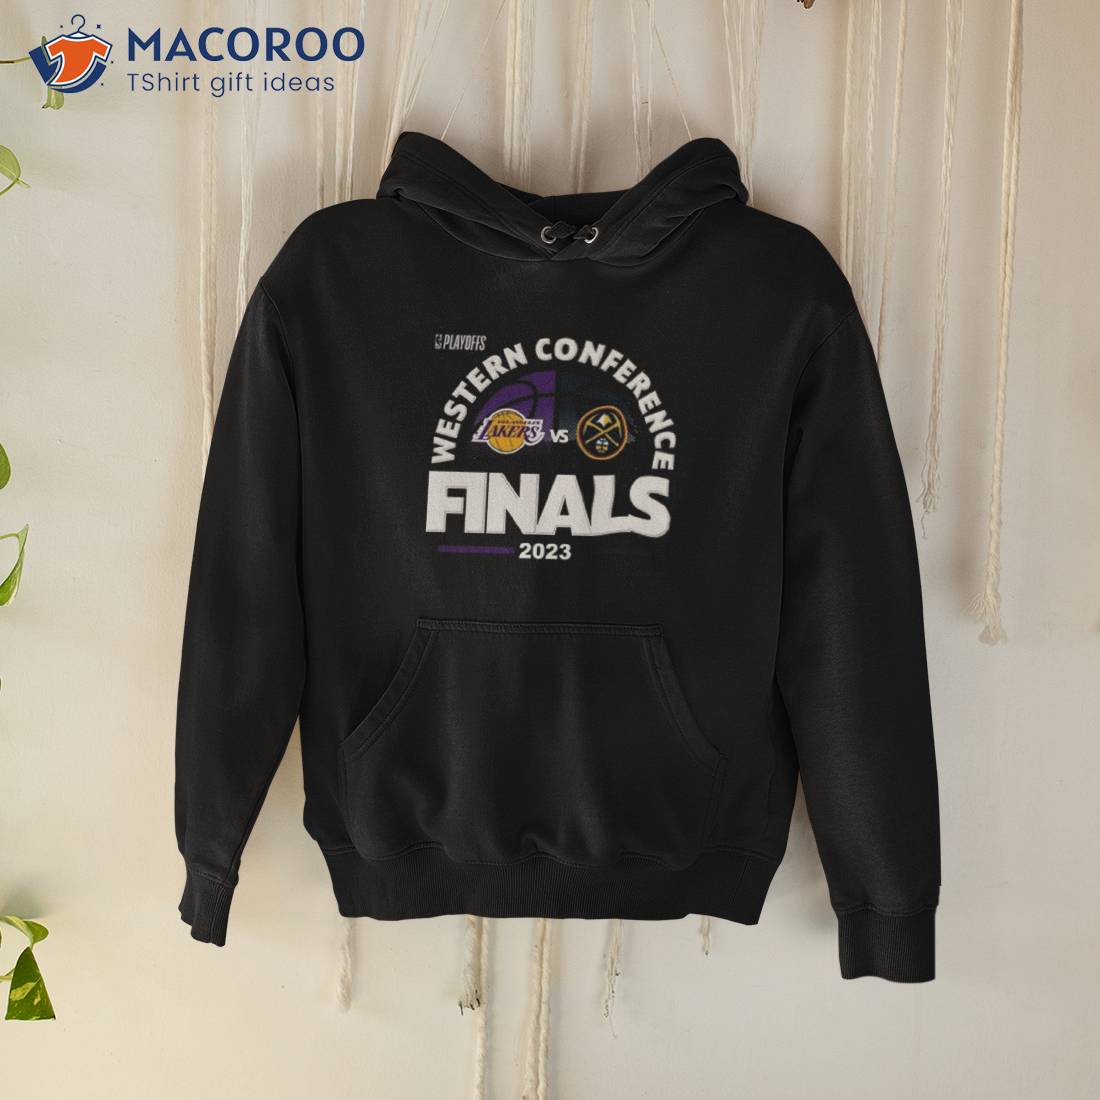 Funny vintage NBA Playoffs all teams basketball shirt, hoodie, sweater and  unisex tee